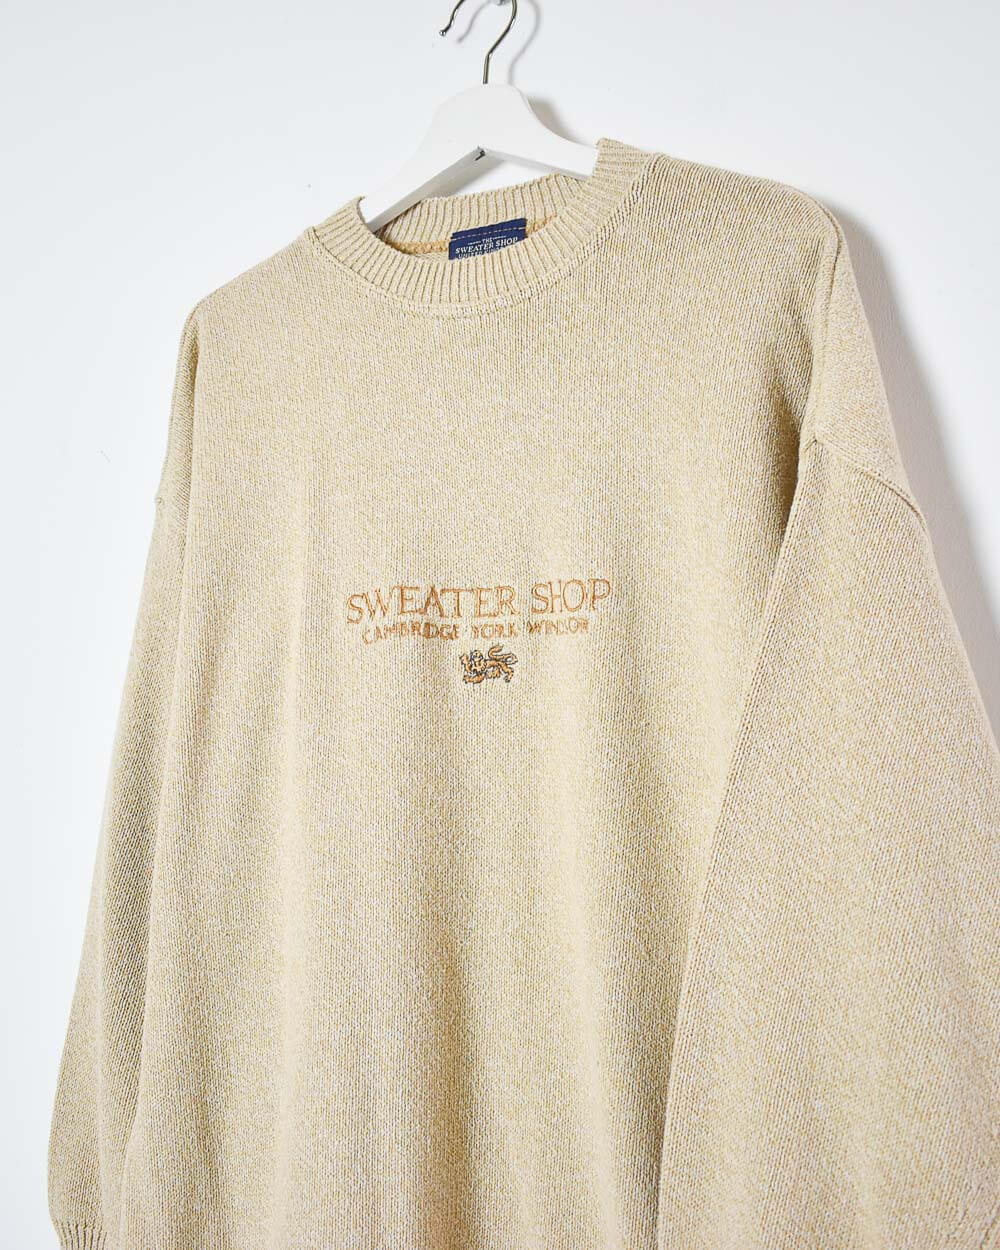 Neutral The Sweater Shop Knitted Sweatshirt - Large